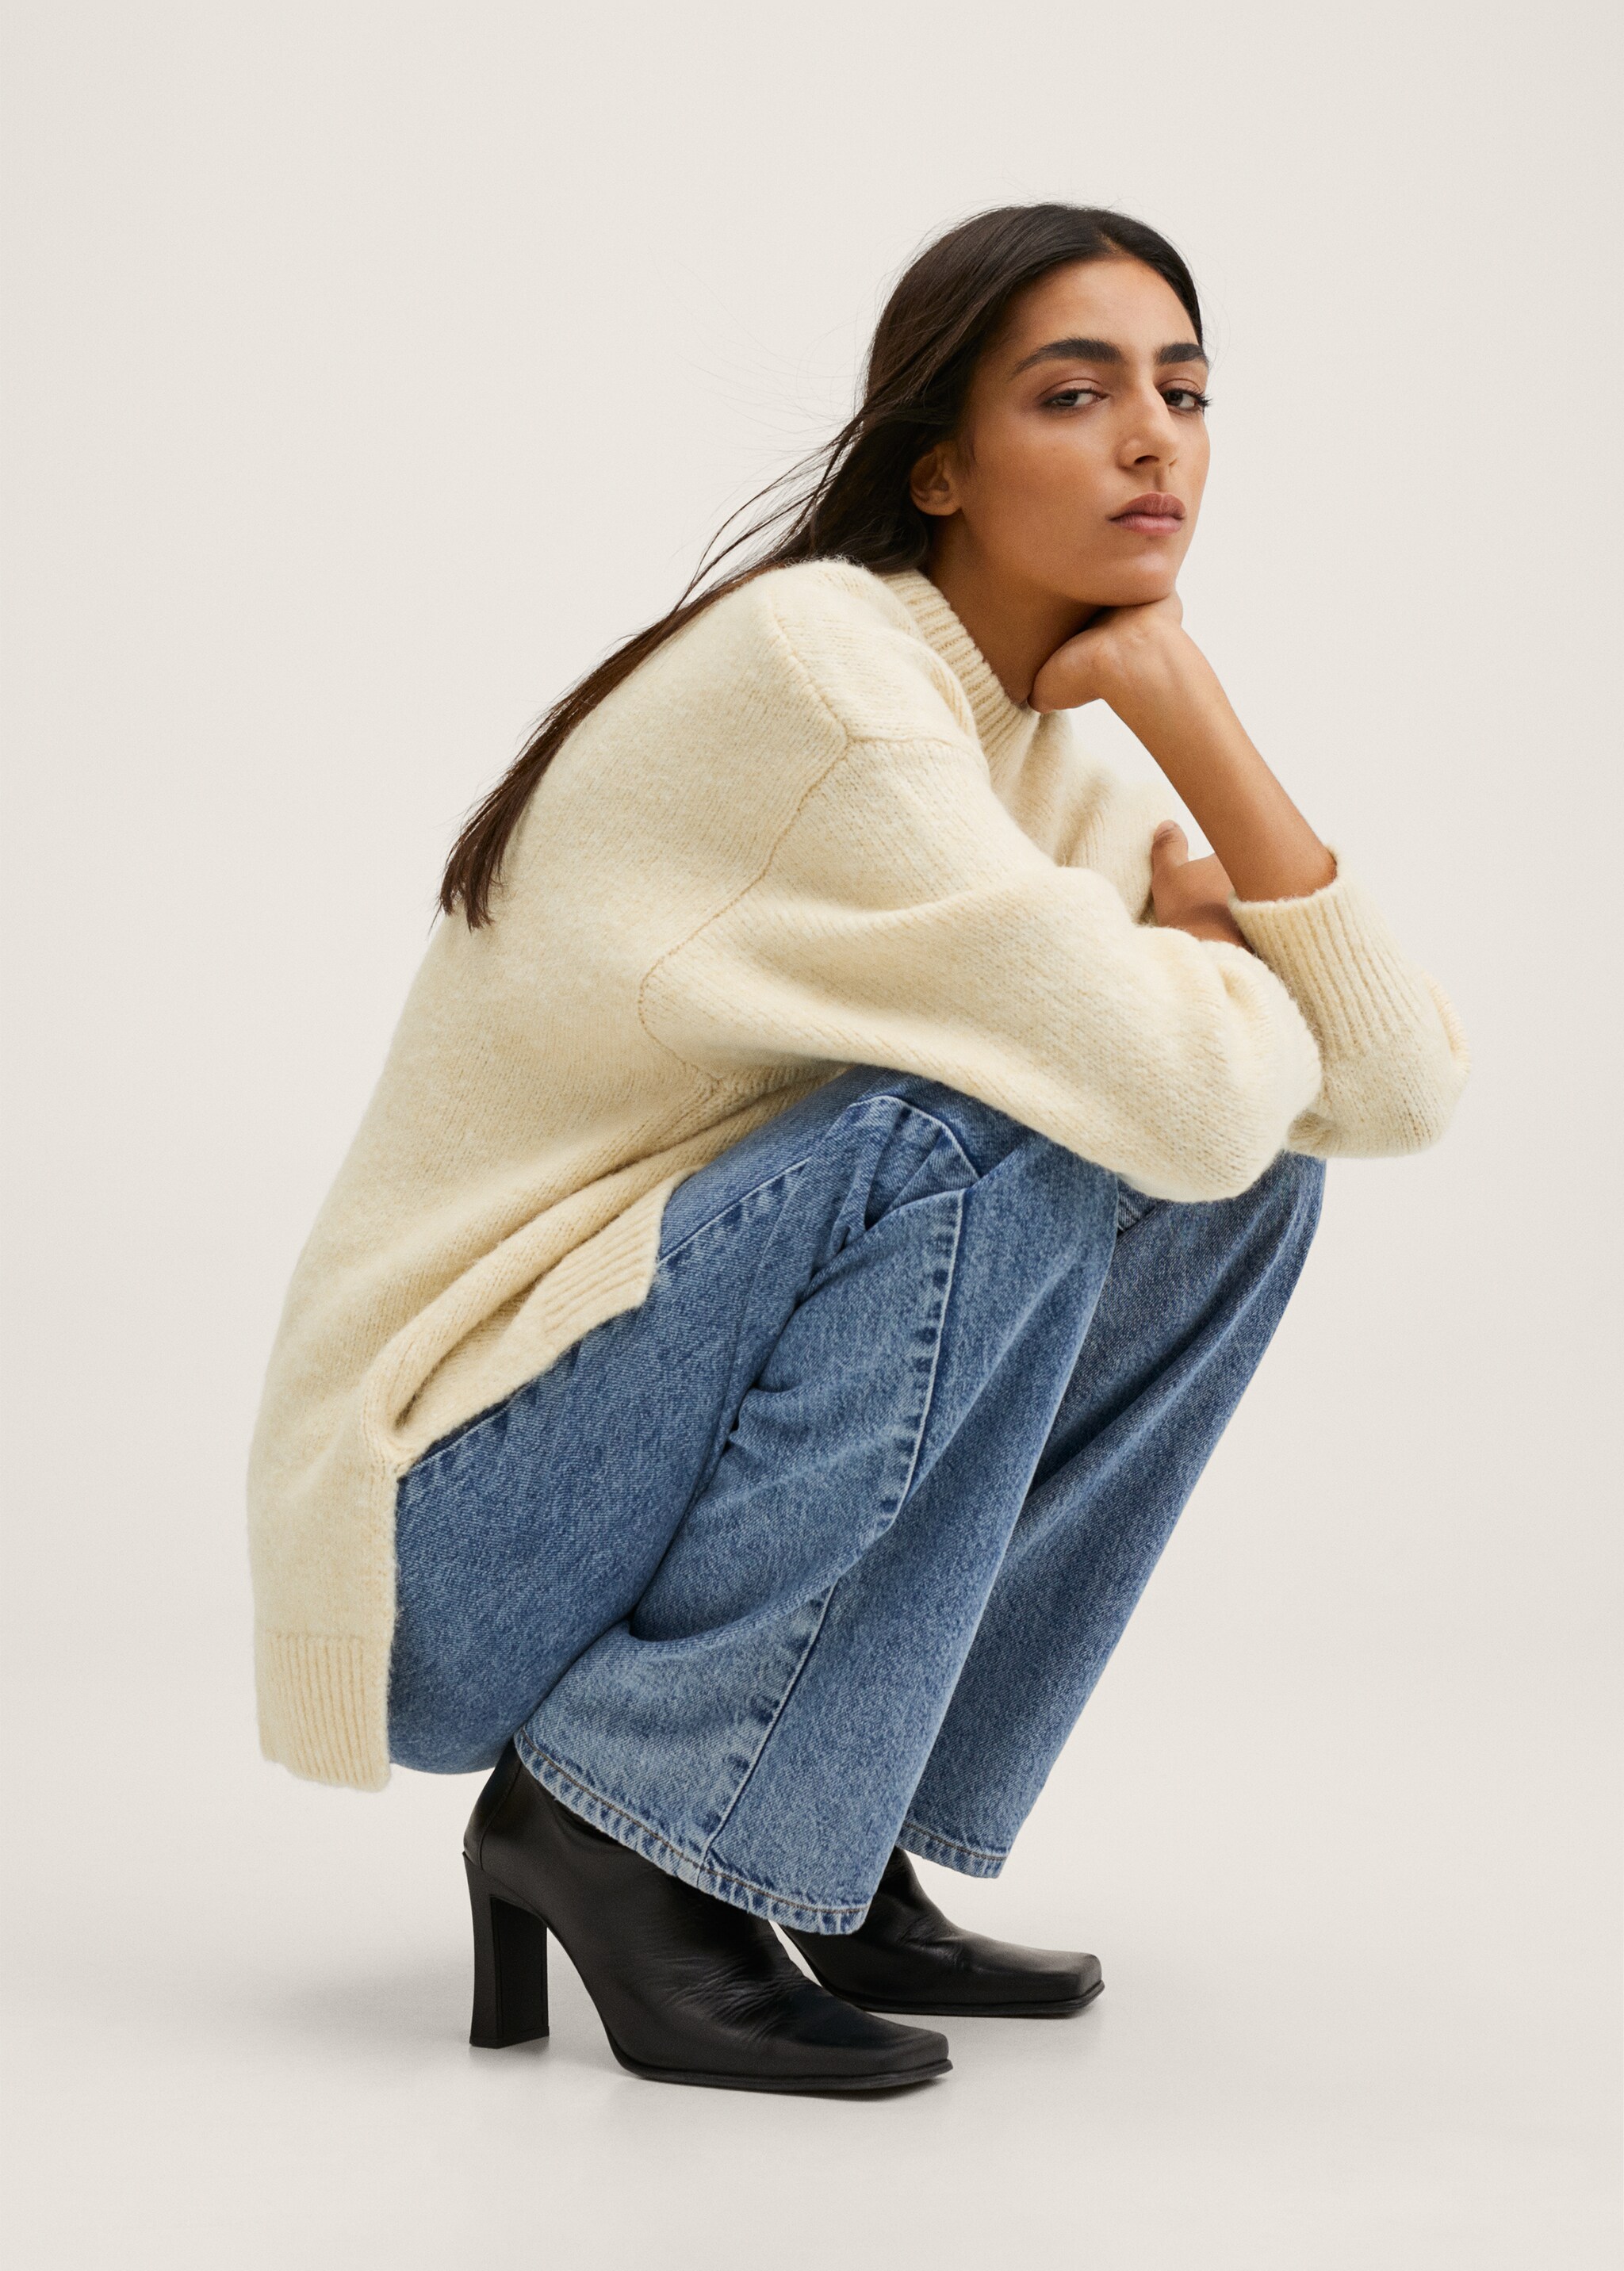 Oversize knit sweater - Details of the article 1